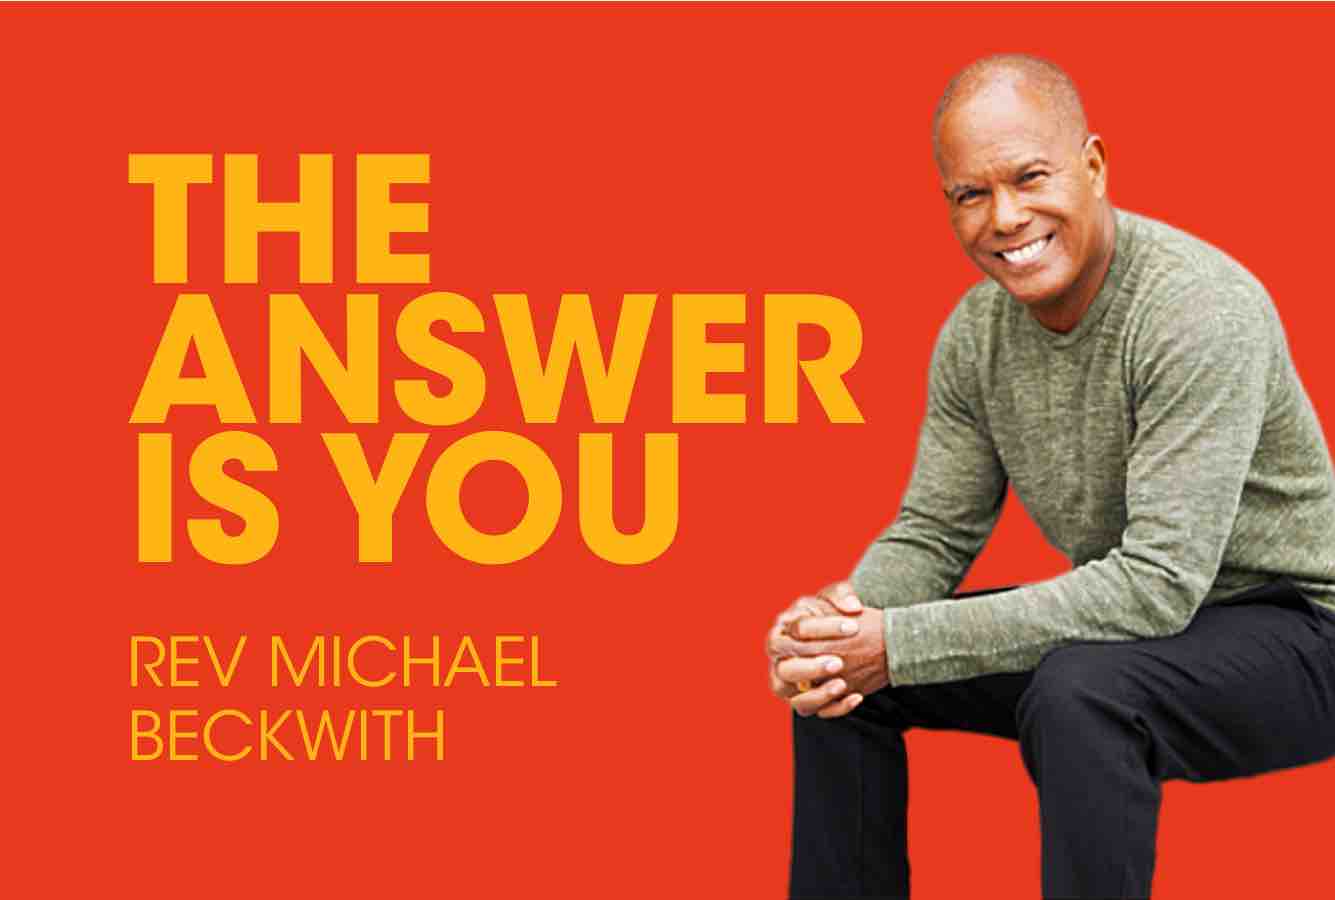 The Answer Is You by Rev Michael Beckwith